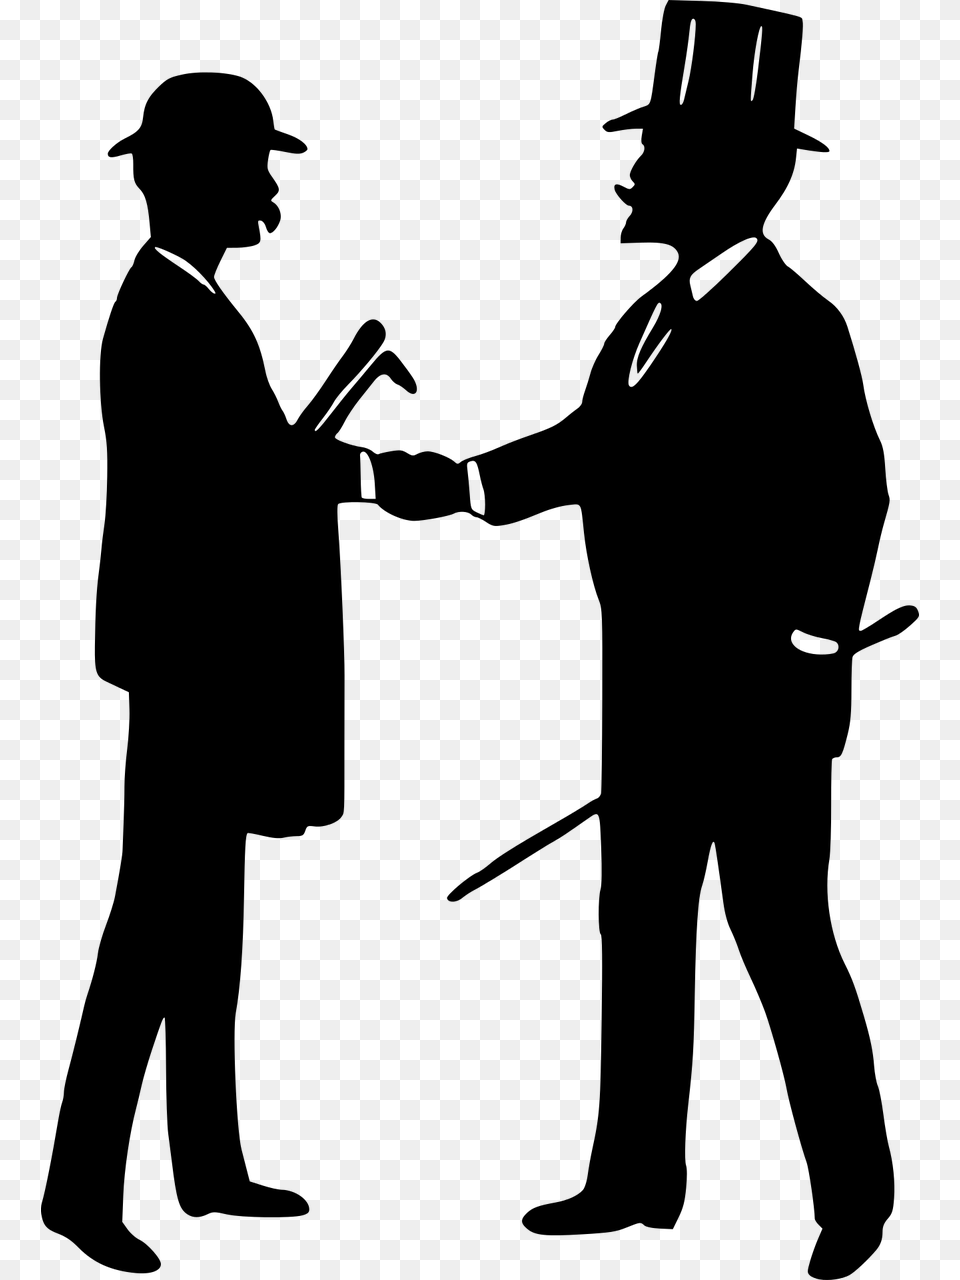 The Post Cold War Global Institutional Order Arguably Gentleman Shaking Hands, Gray Free Png